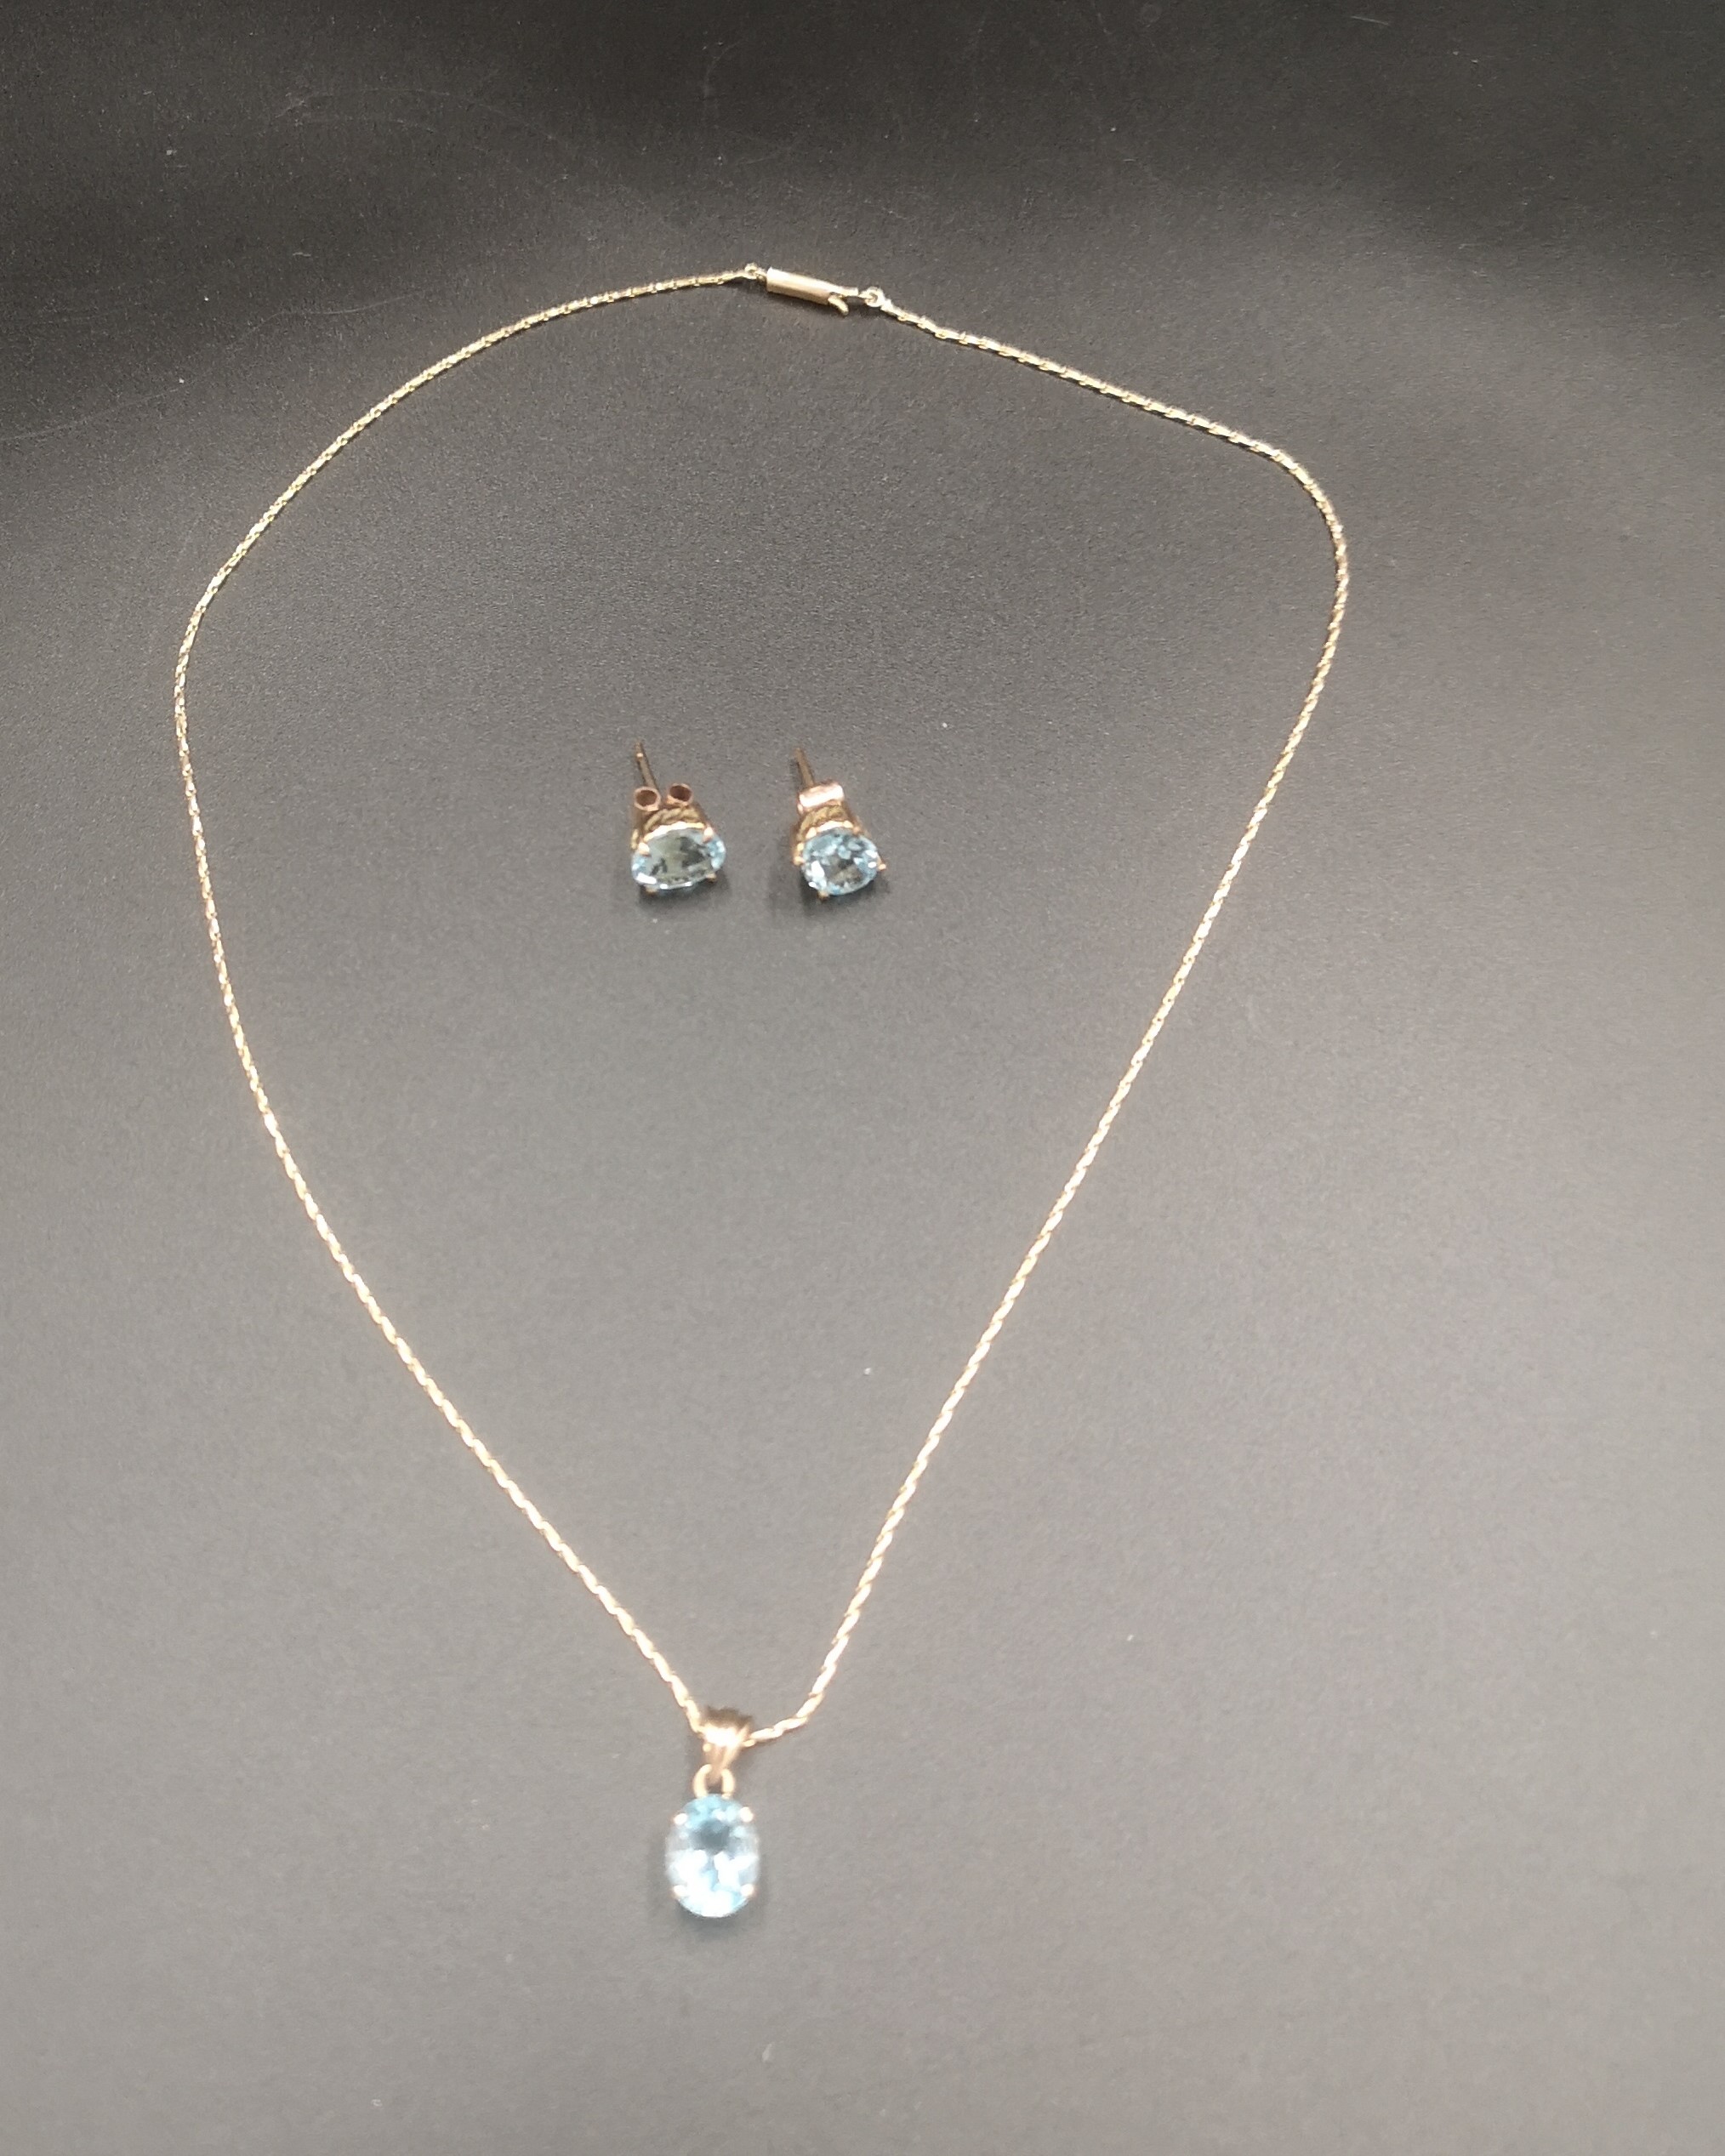 14ct gold and blue topaz earrings